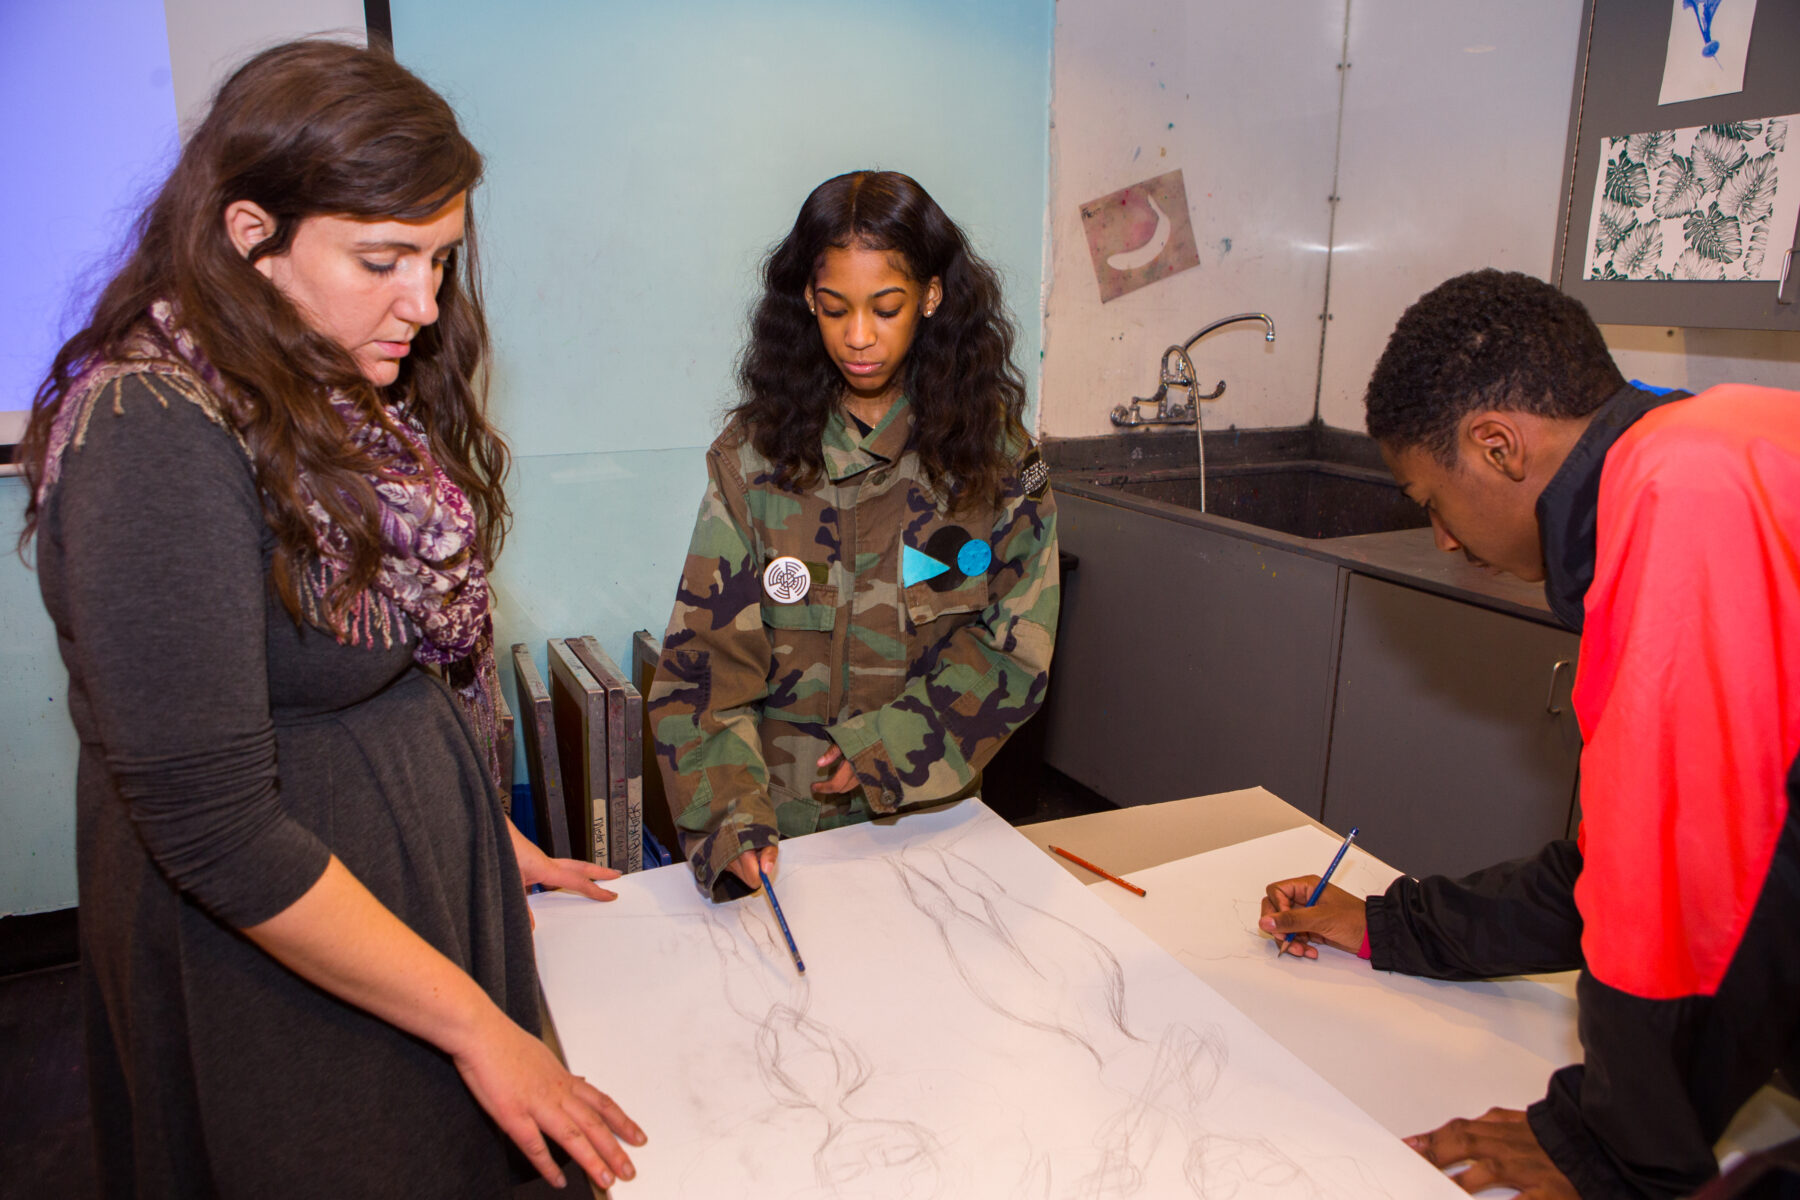 Three individuals examine sketches of an exaggerated female figure on a table in The Factory.